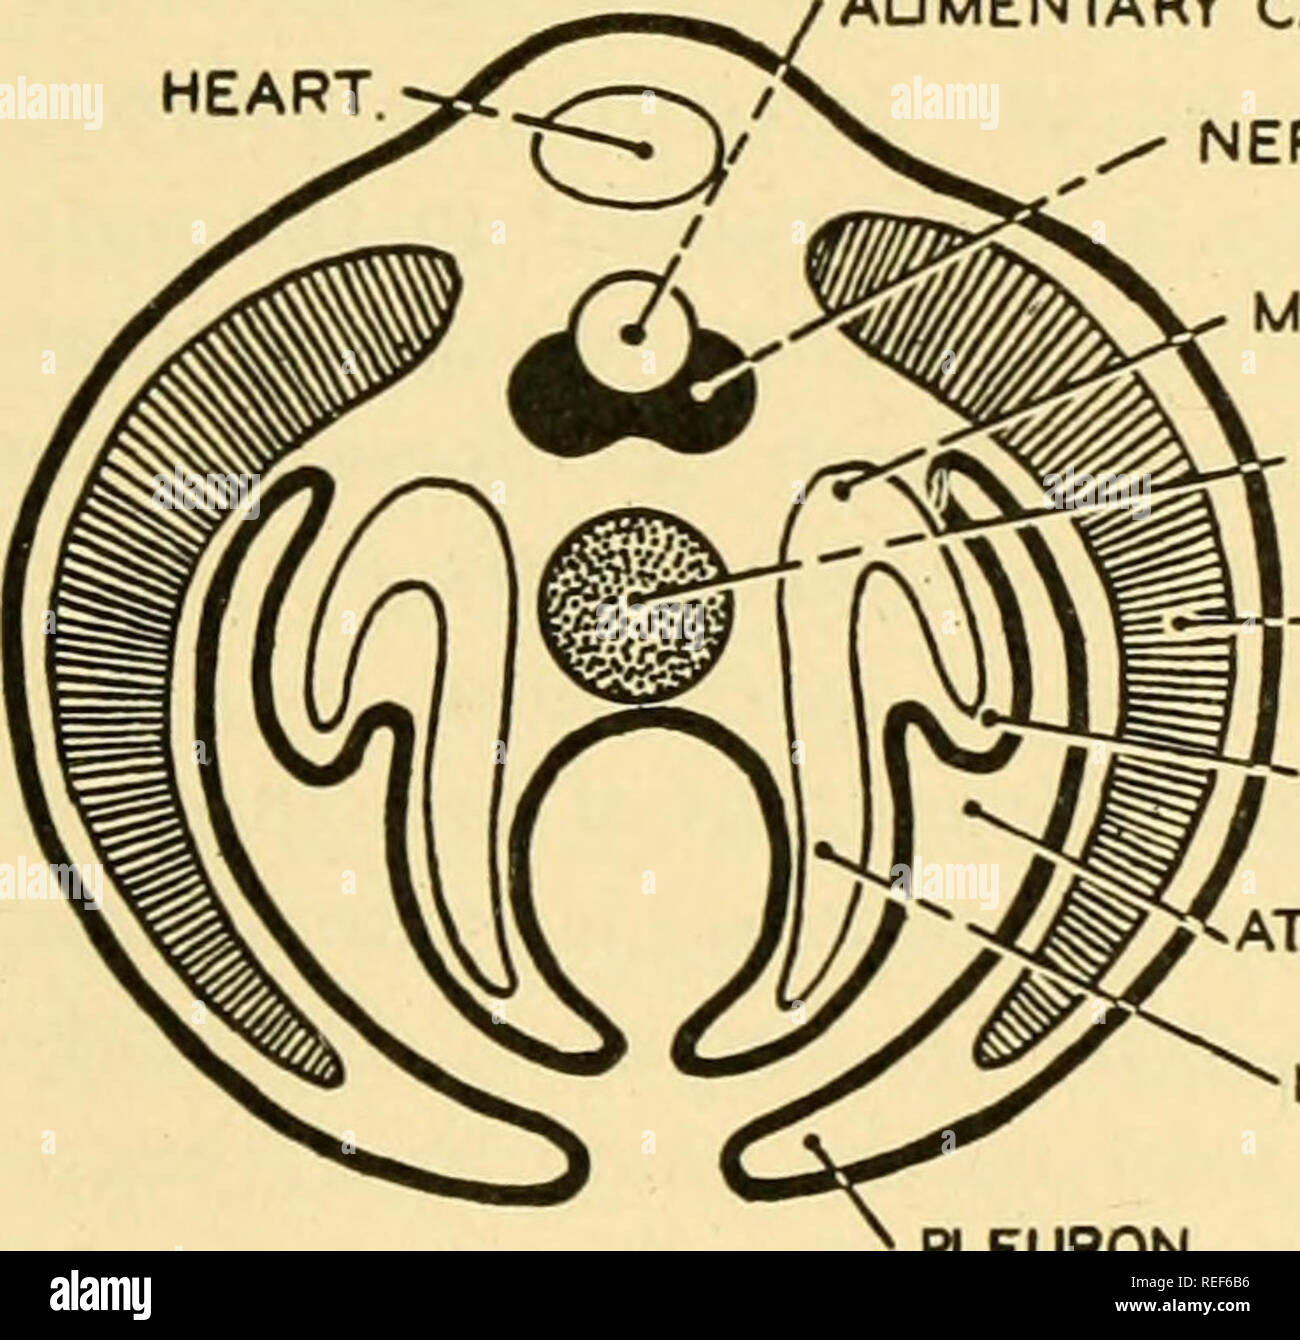 . Comparative anatomy. Anatomy, Comparative. ^NOTOCHORDAL GROOVE. NOTOCHORD. AUMENTARY CANAL, HEART. FAT BODY. NERVOUS SYSTEM MESONEPHROS NOTOCHORD -MYOTOME APPENDAGE ATRIAL CHAMBER METACOELE PLEURON. c Fig. 527.—A diagram illustrating how a trilobite-like animal (.4) might evolve into a vertebrate (D). B and C are hypothetical stages transitional between A and D. All figures represent cross sections. Since Gaskell's theory of the origin of vertebrates assumes that the arthropod intestine has become the lining of the brain and spinal cord of vertebrates, a new alimentary canal and a notochord  Stock Photo